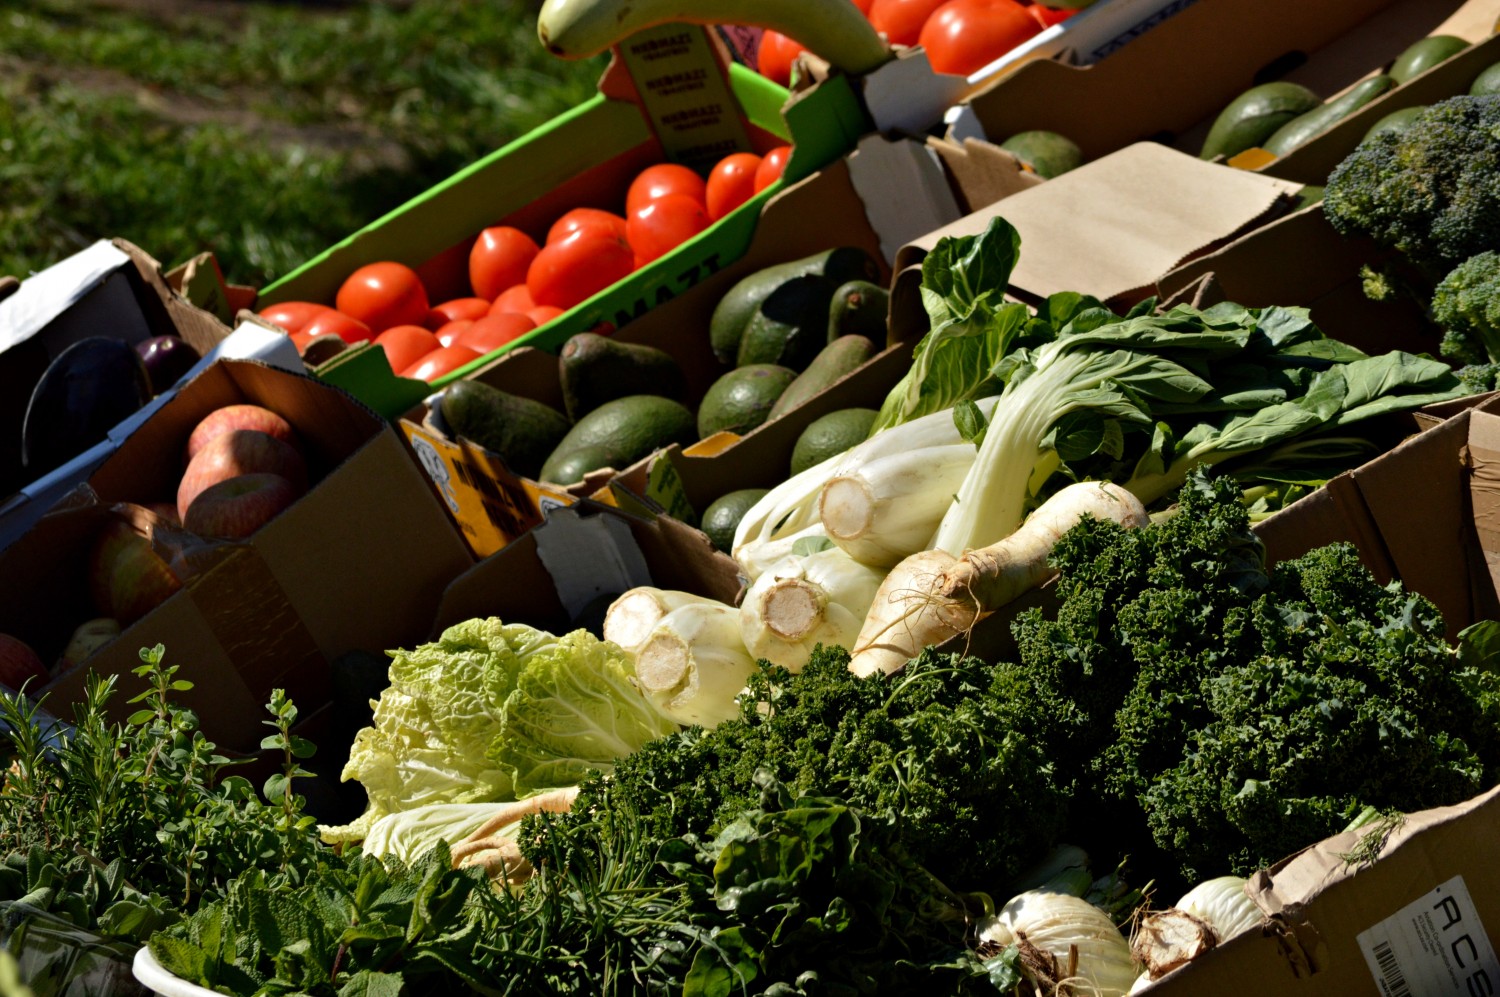 Competition Commission SA to Establish a Market Inquiry Into the Fresh Produce Market